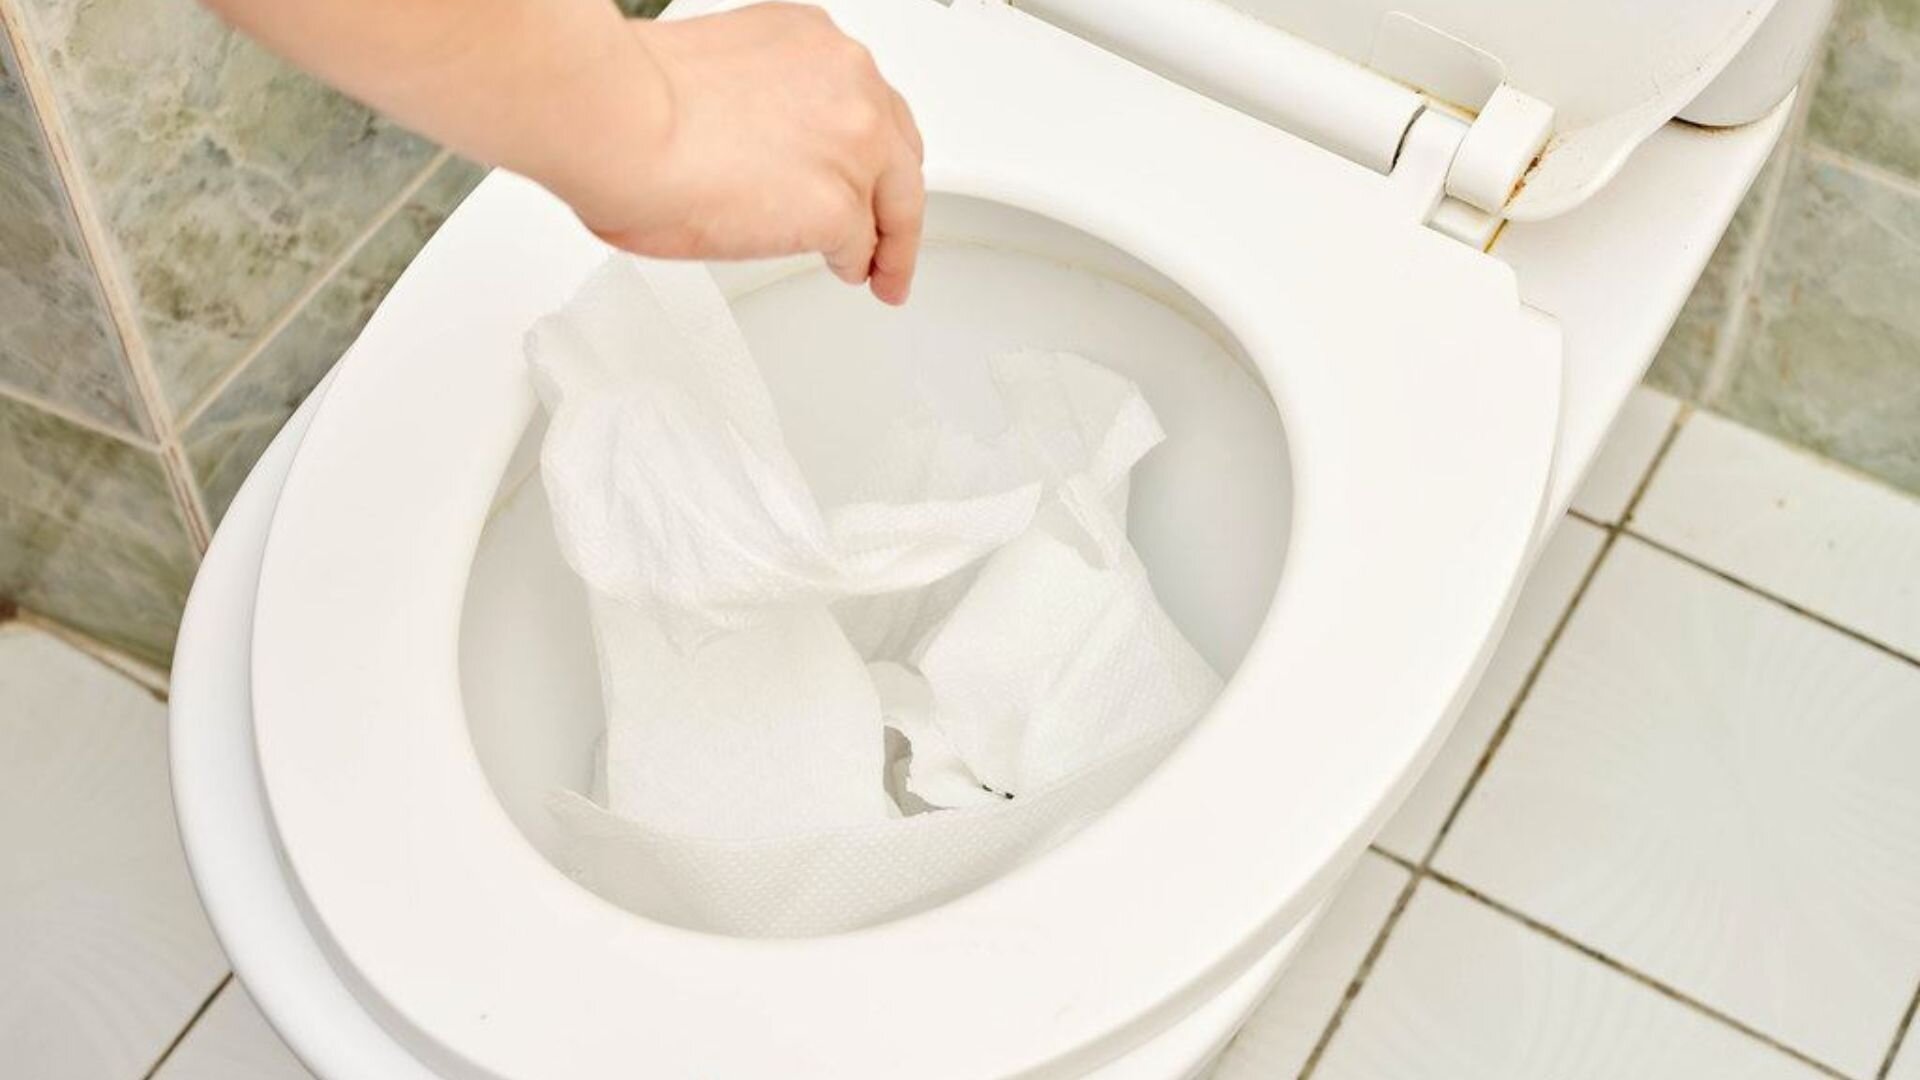 What To Do When A Toilet Is Clogged